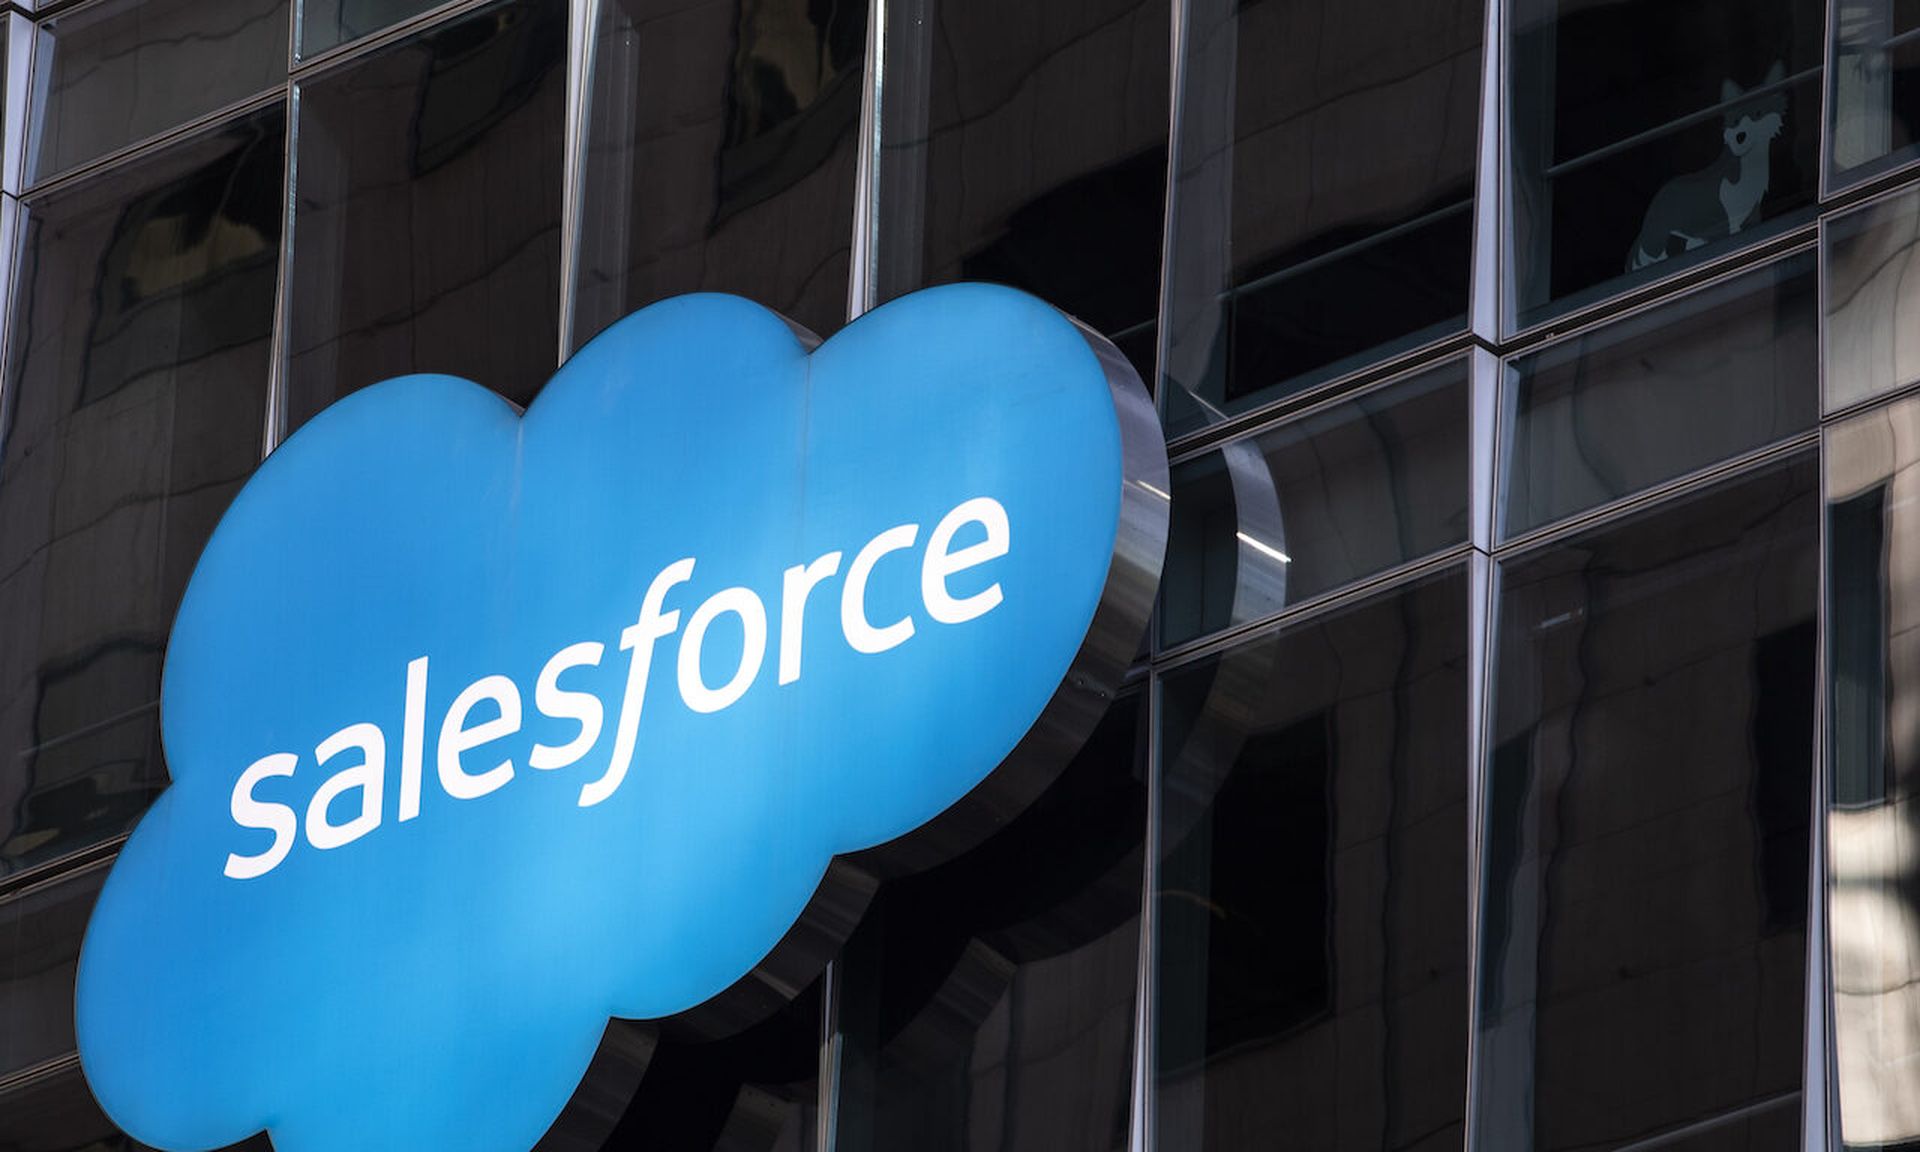 Today’s columnist, Yoni Shohet of Valence Security, writes that SaaS apps such as Salesforce are inherently secure. Security issues come when third-party apps and APIs are not secure. (Photo by Stephen Lam/Getty Images)